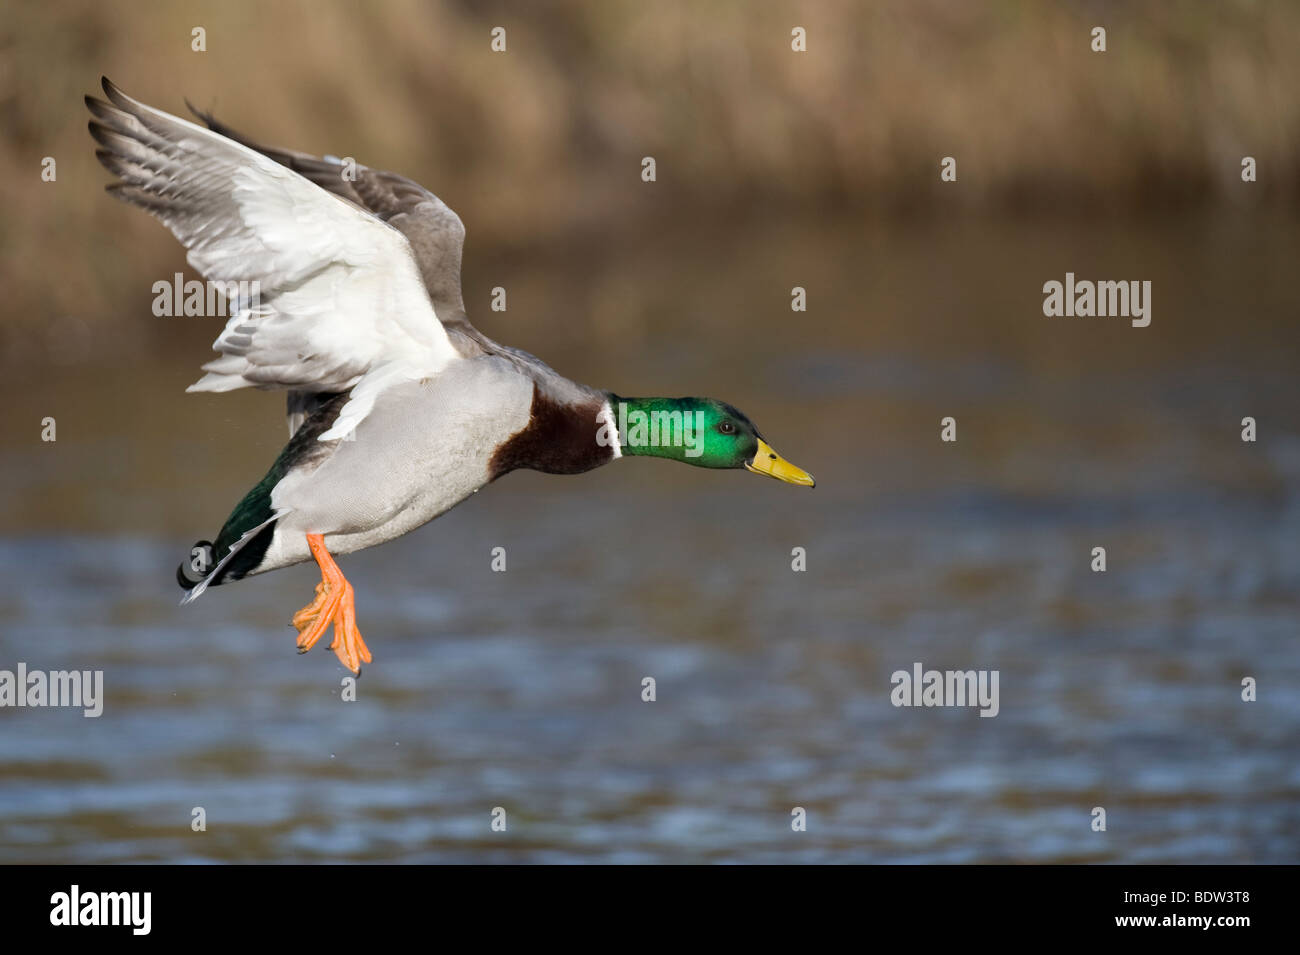 A flying duck Stock Photo